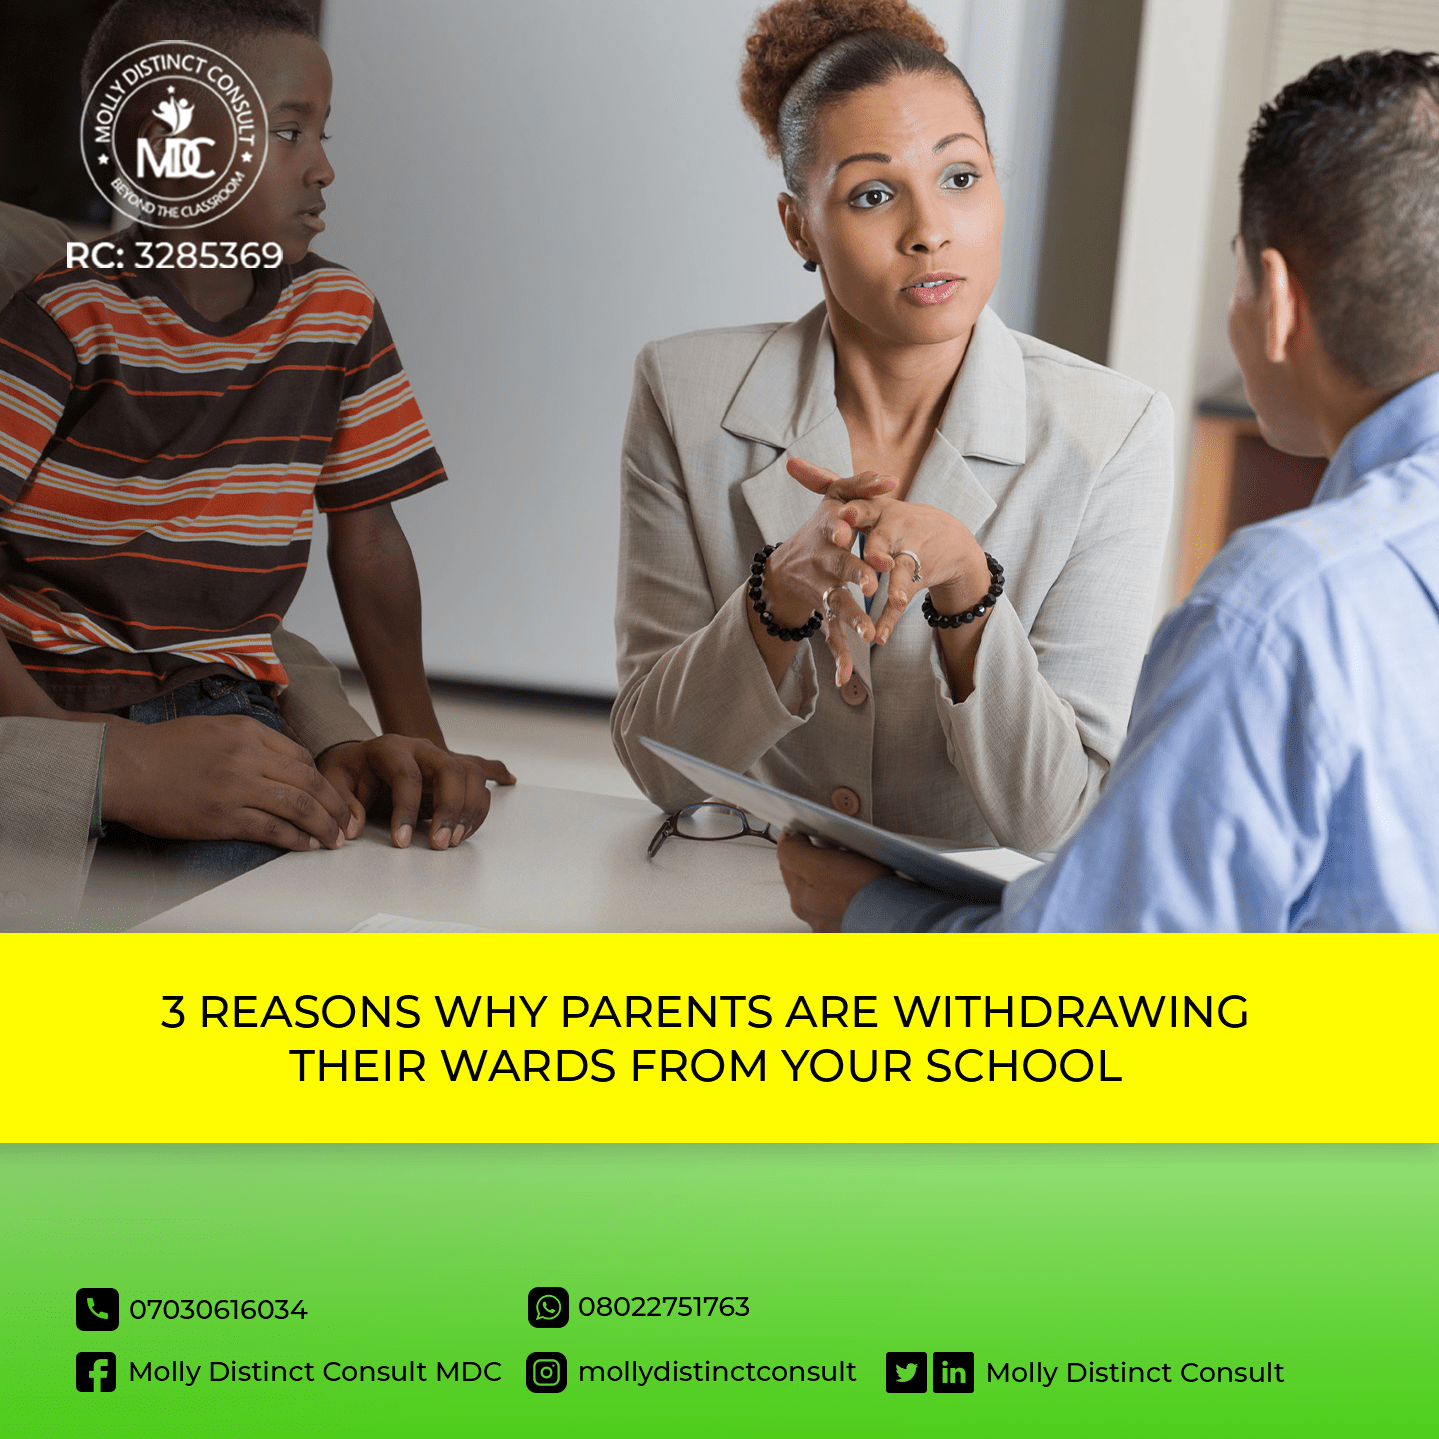 3 REASONS WHY PARENTS ARE WITHDRAWING THEIR WARDS FROM YOUR SCHOOL ...